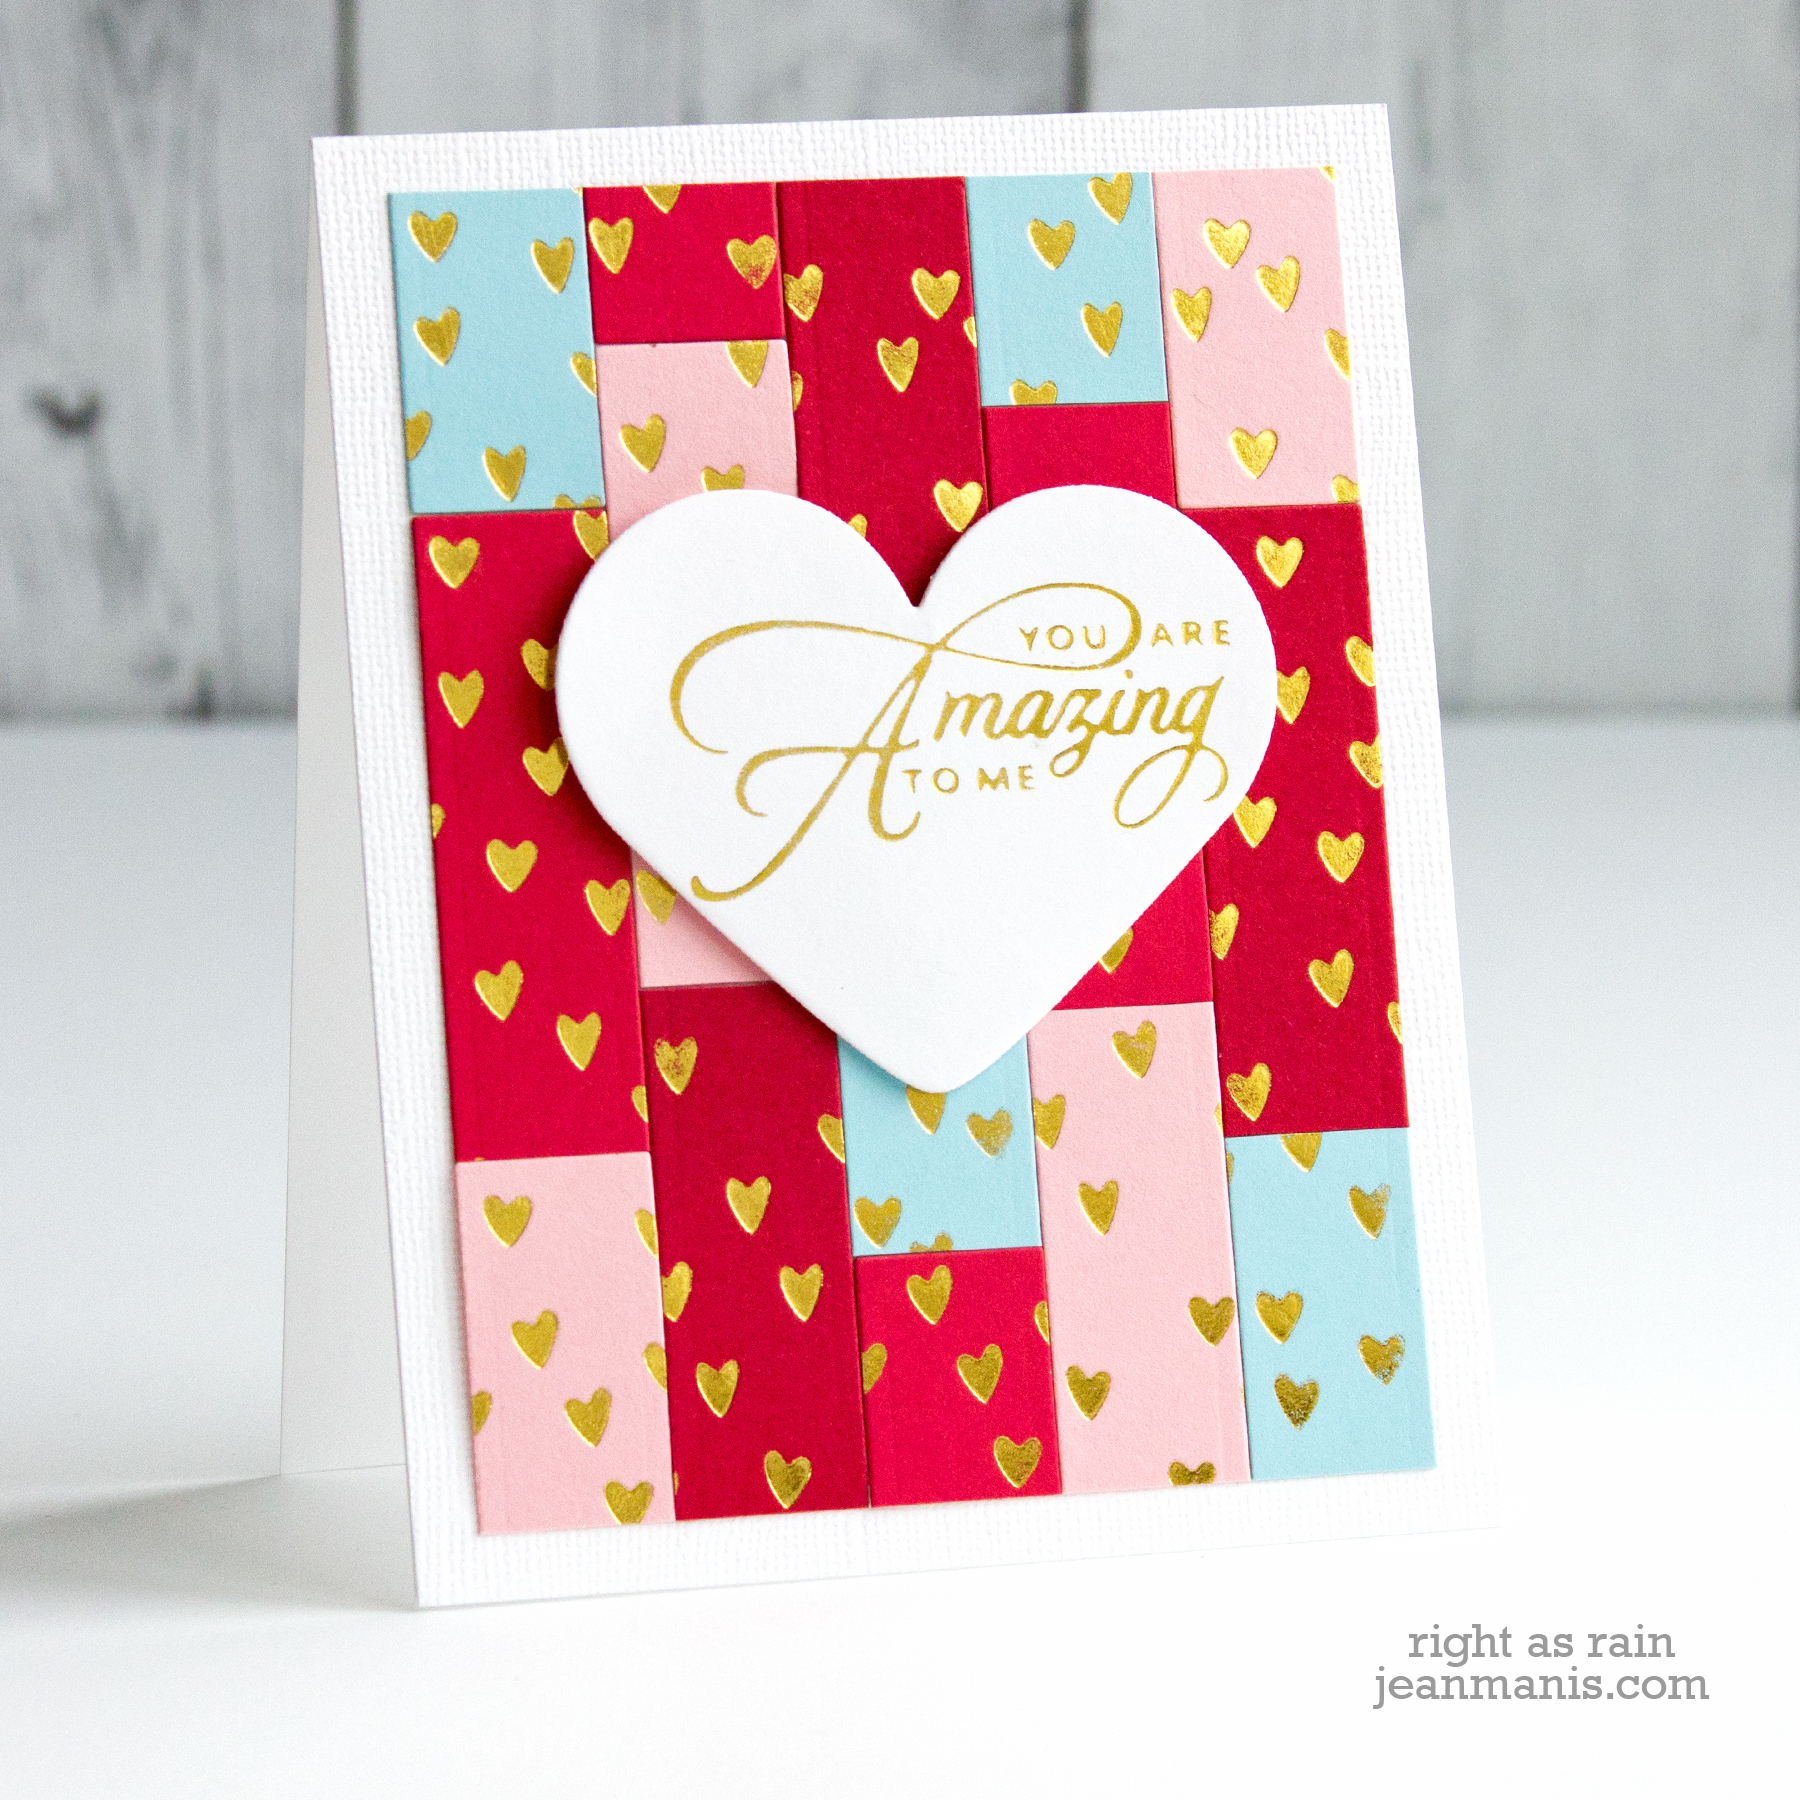 Spellbinders Expressions of Love Collection